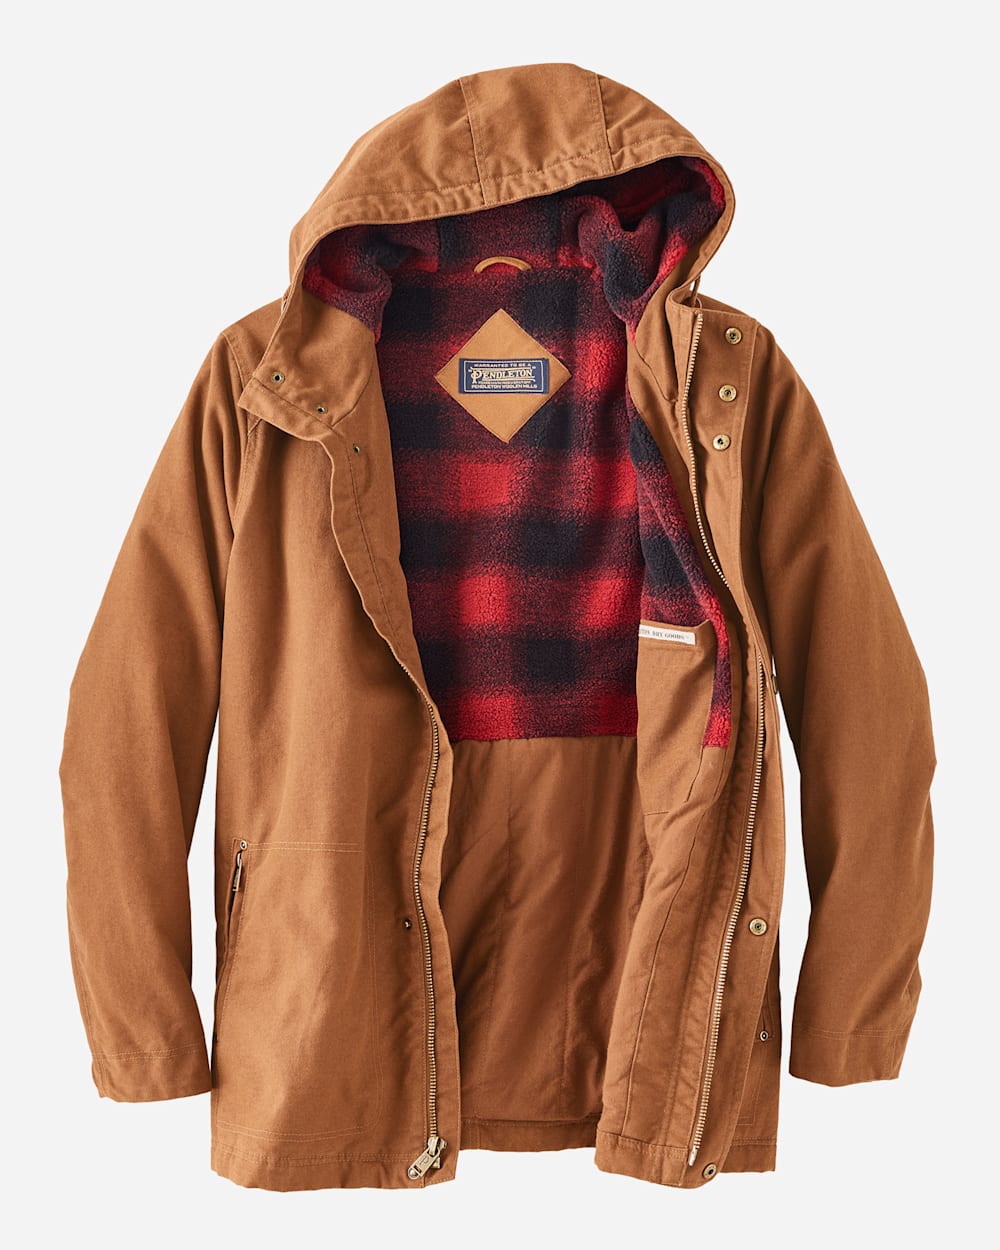 ALTERNATE VIEW OF MEN'S BROTHERS HOODED TIMBER CRUISER IN WHISKEY image number 2